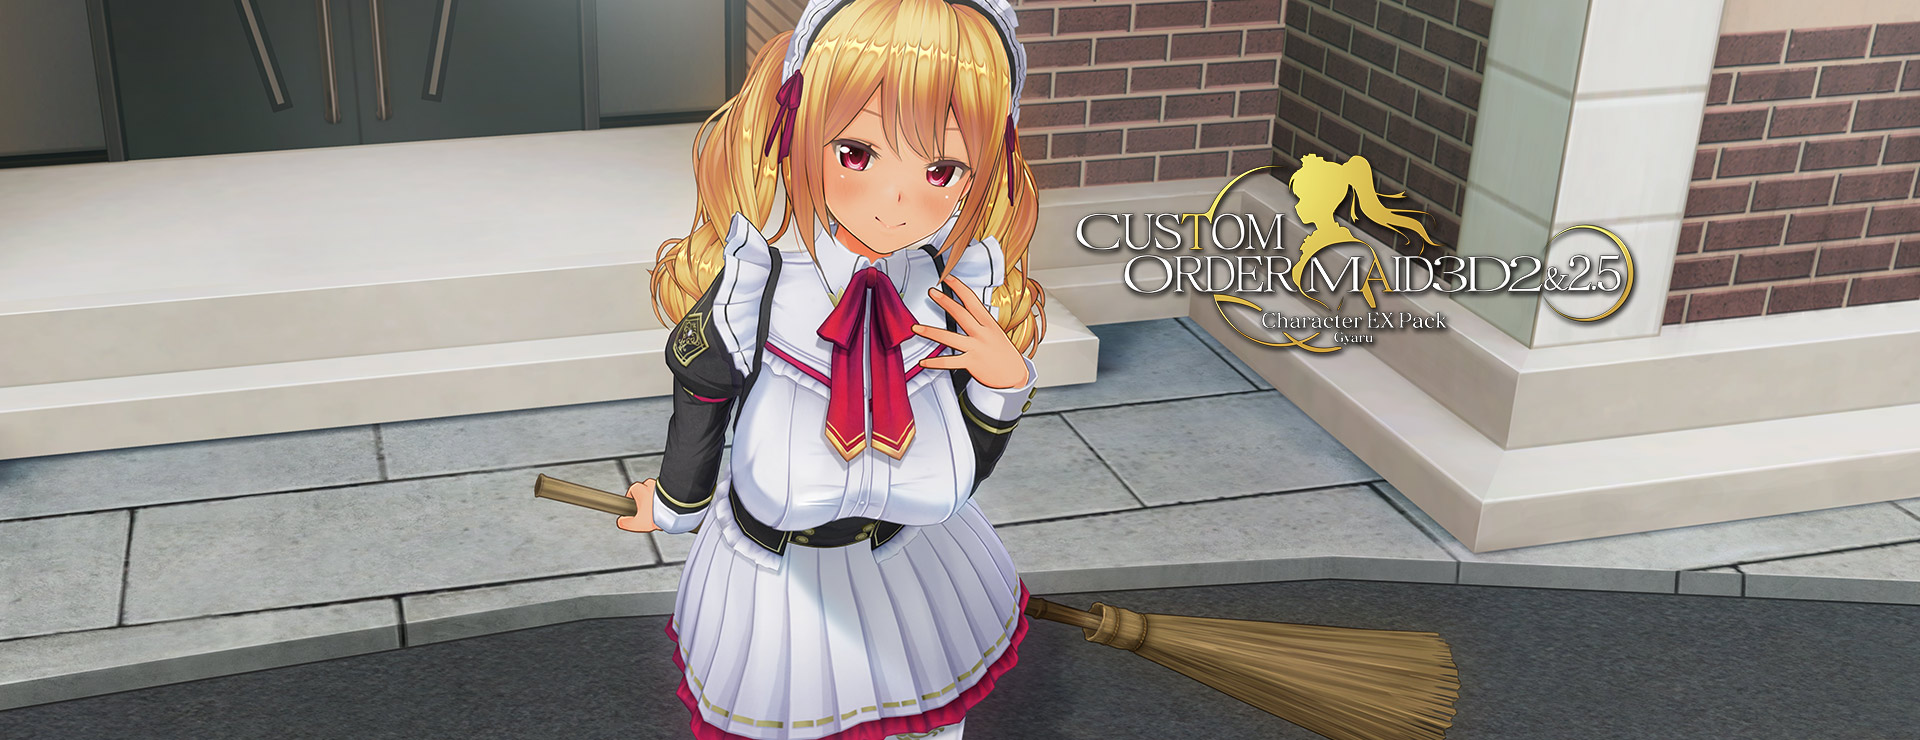 Custom Order Maid 3D 2: Character EX Pack Gyaru High Poly All In One Edition - Simulation Game